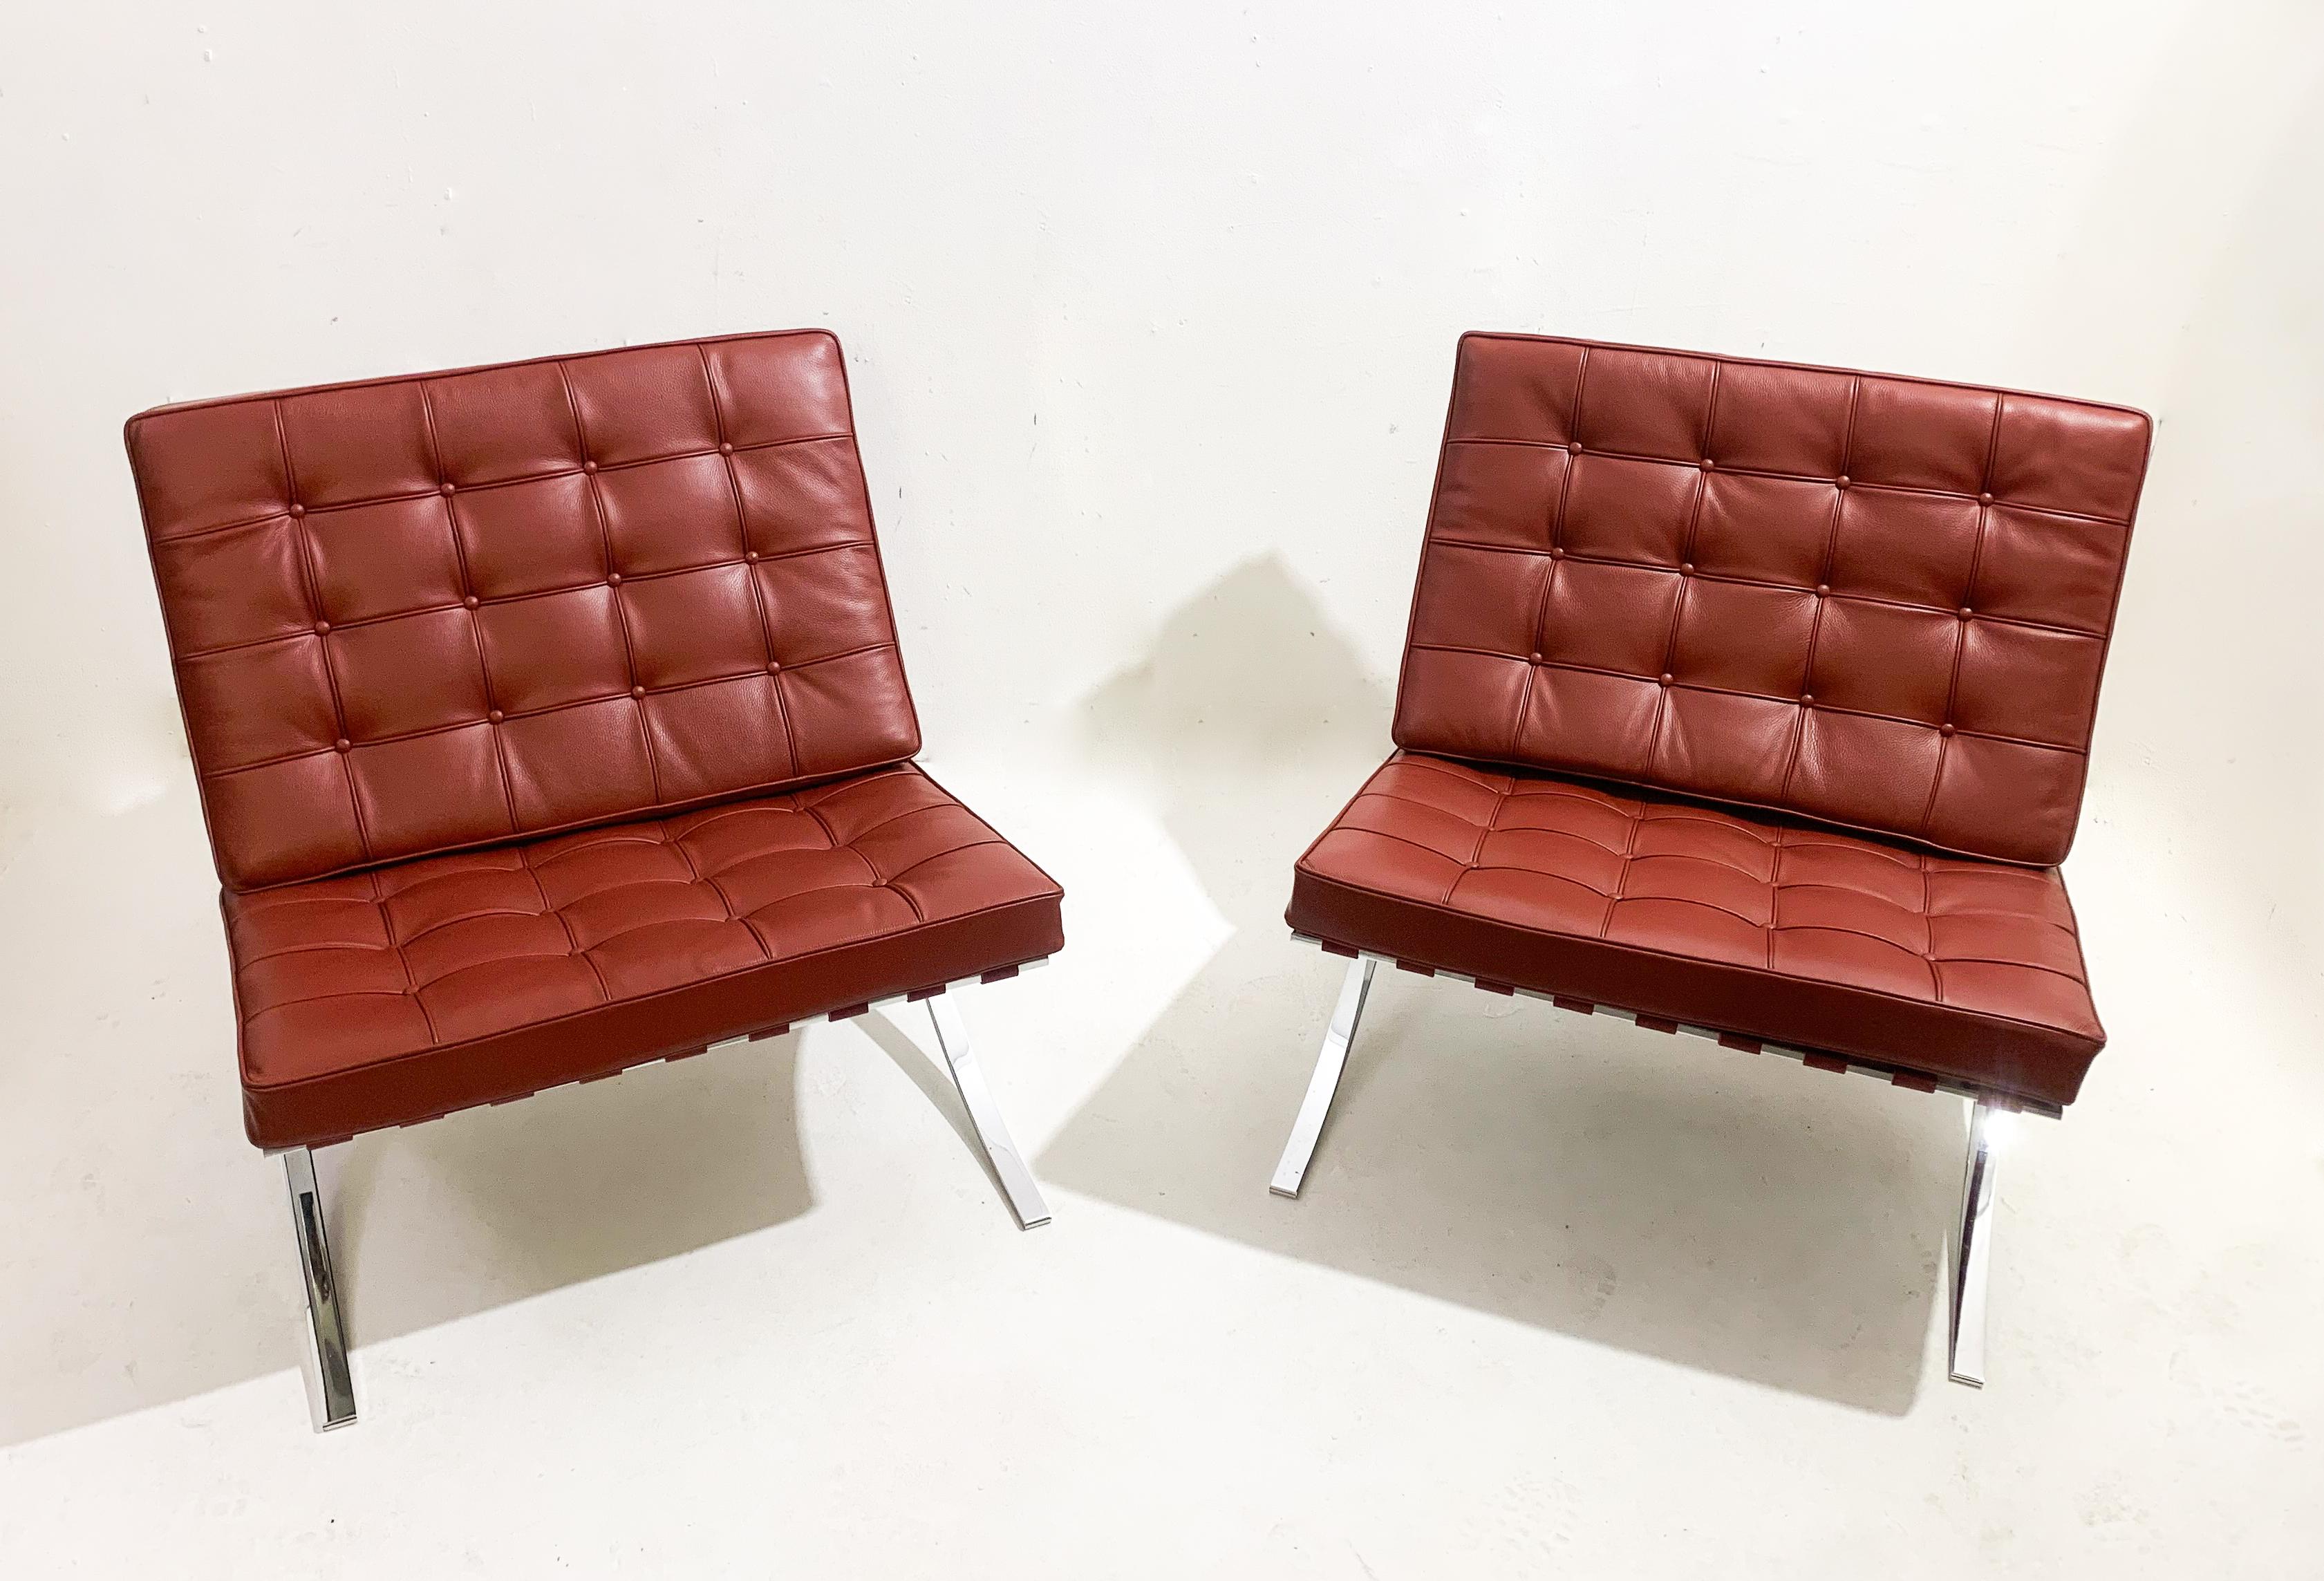 Pair of Burgundy Leather Barcelona Chairs by Mies Van Der Rohe for Knoll, 1990s For Sale 6